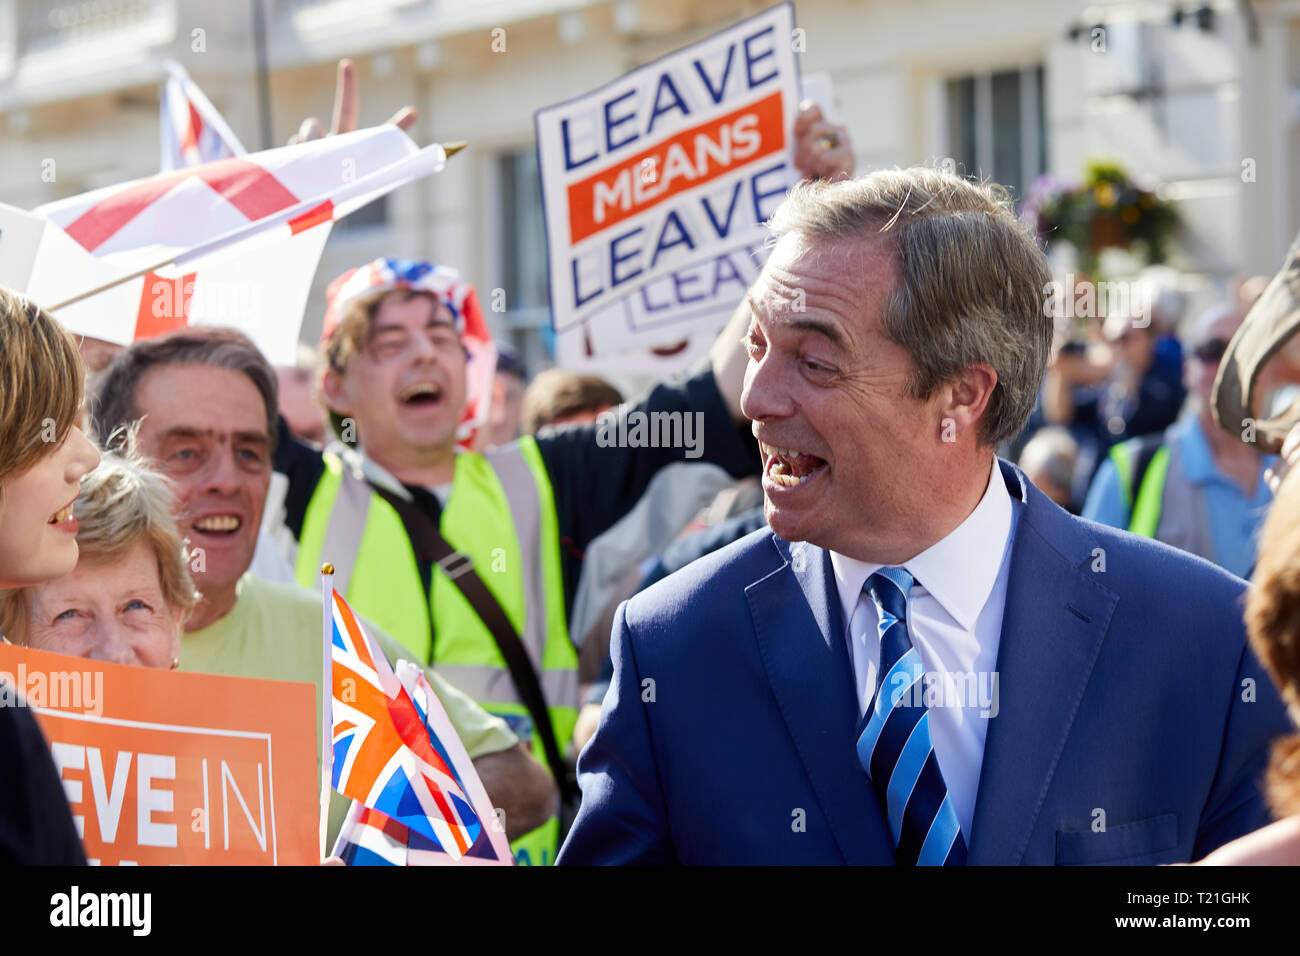 London, UK. - March 29, 2019: Nigel Farage greets marchers protesting on the day the UK should have left the EU. Credit: Kevin J. Frost/Alamy Live News Stock Photo